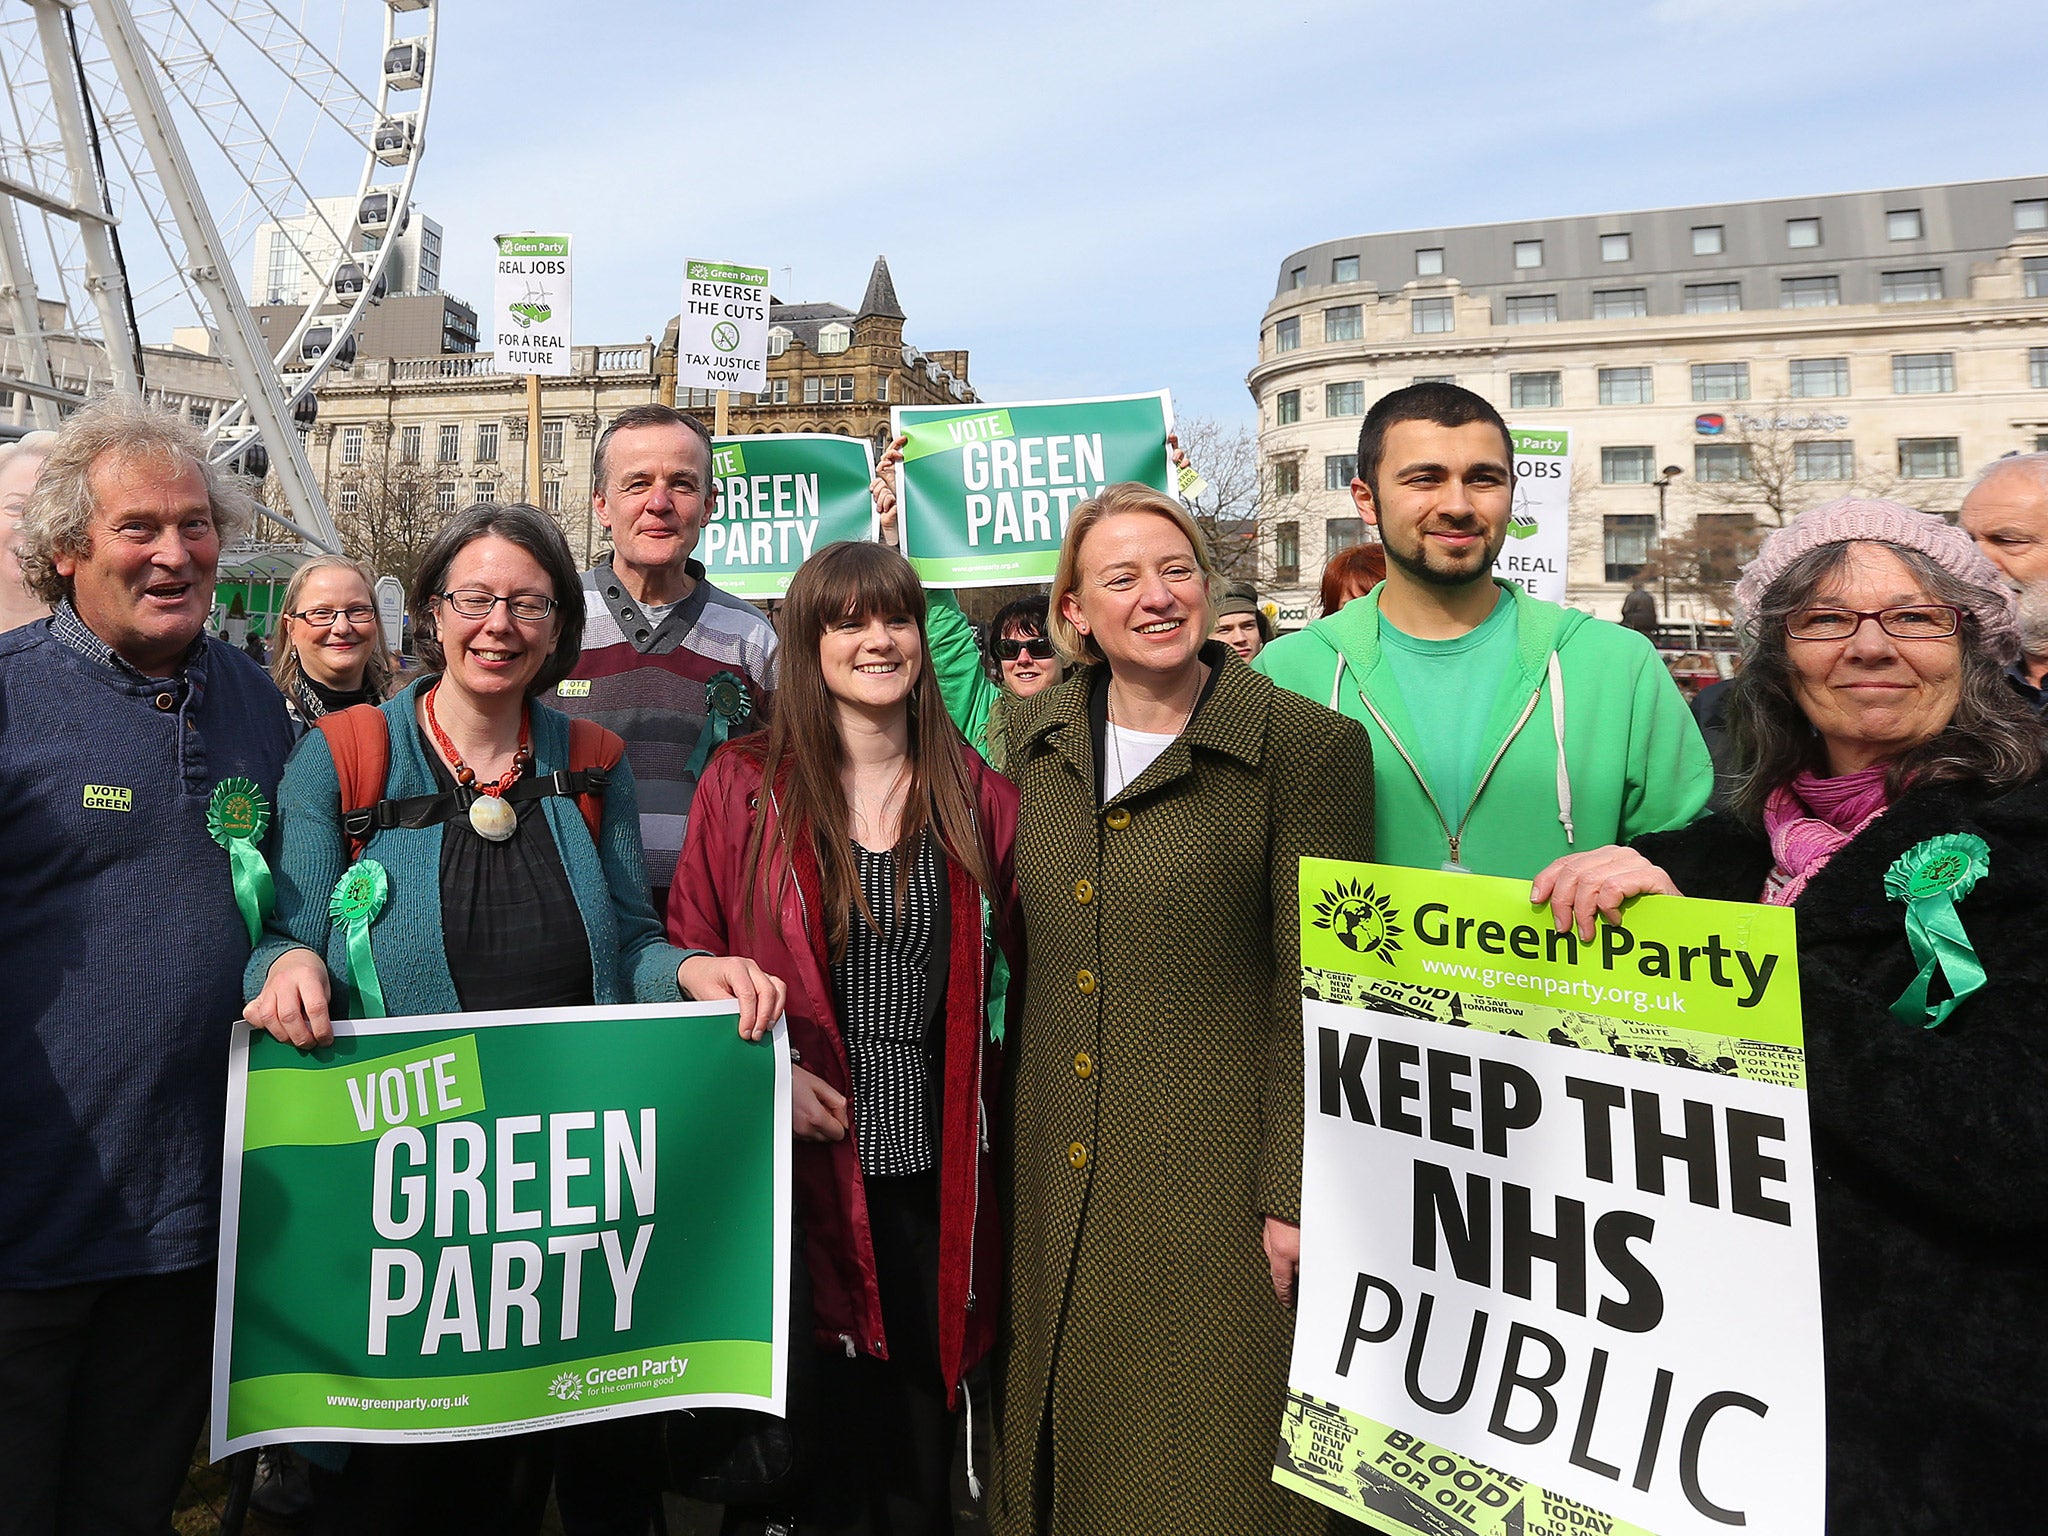 Green Party members and supporters - including its leader, Natalie Bennett - on the campaign trail in Manchester earlier this year (Getty)